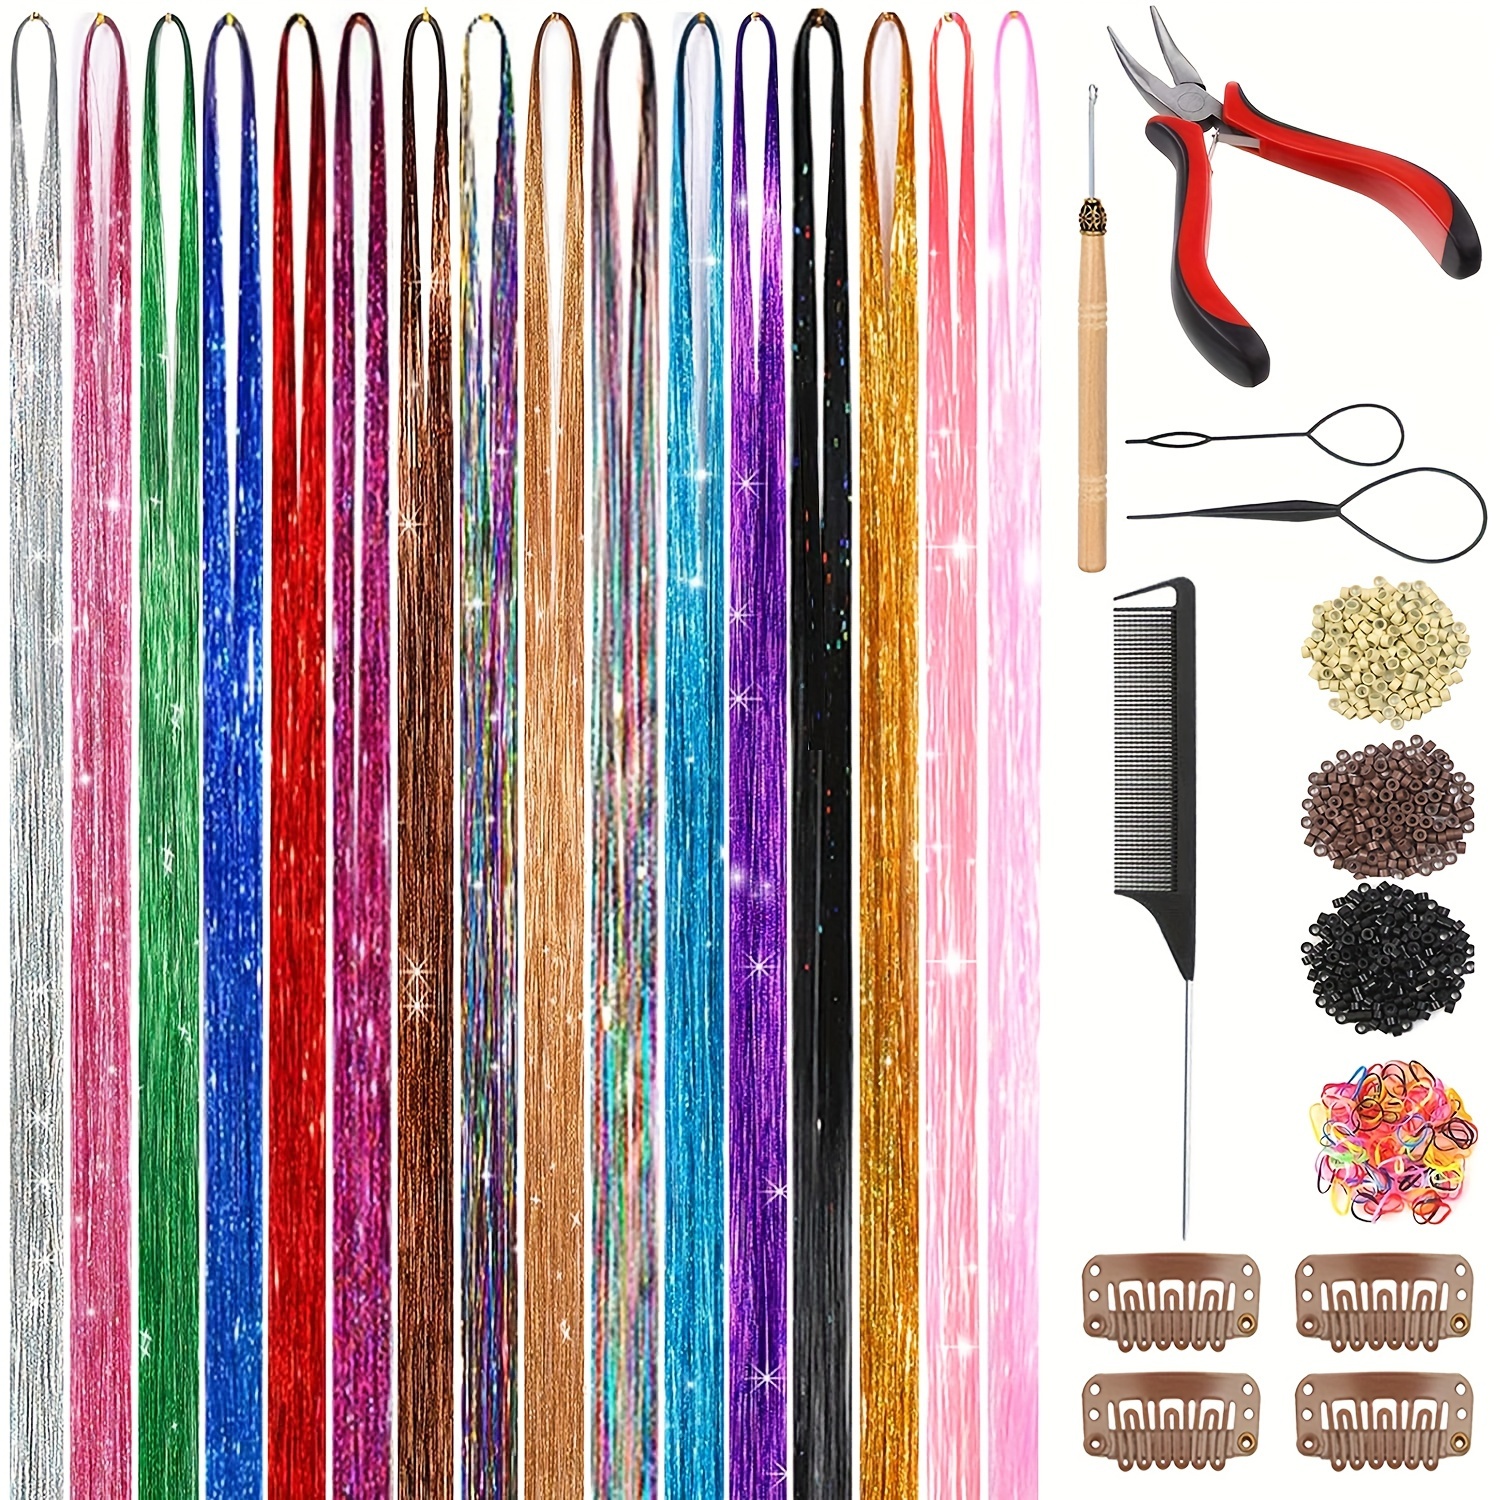 Hair Tinsel Kit (48 inch, 16 Colors, 3200 strands), Glitter Sparkling Tinsel Hair Extensions with Tools, Heat Resistant Fairy Hair Tinsel Kit for